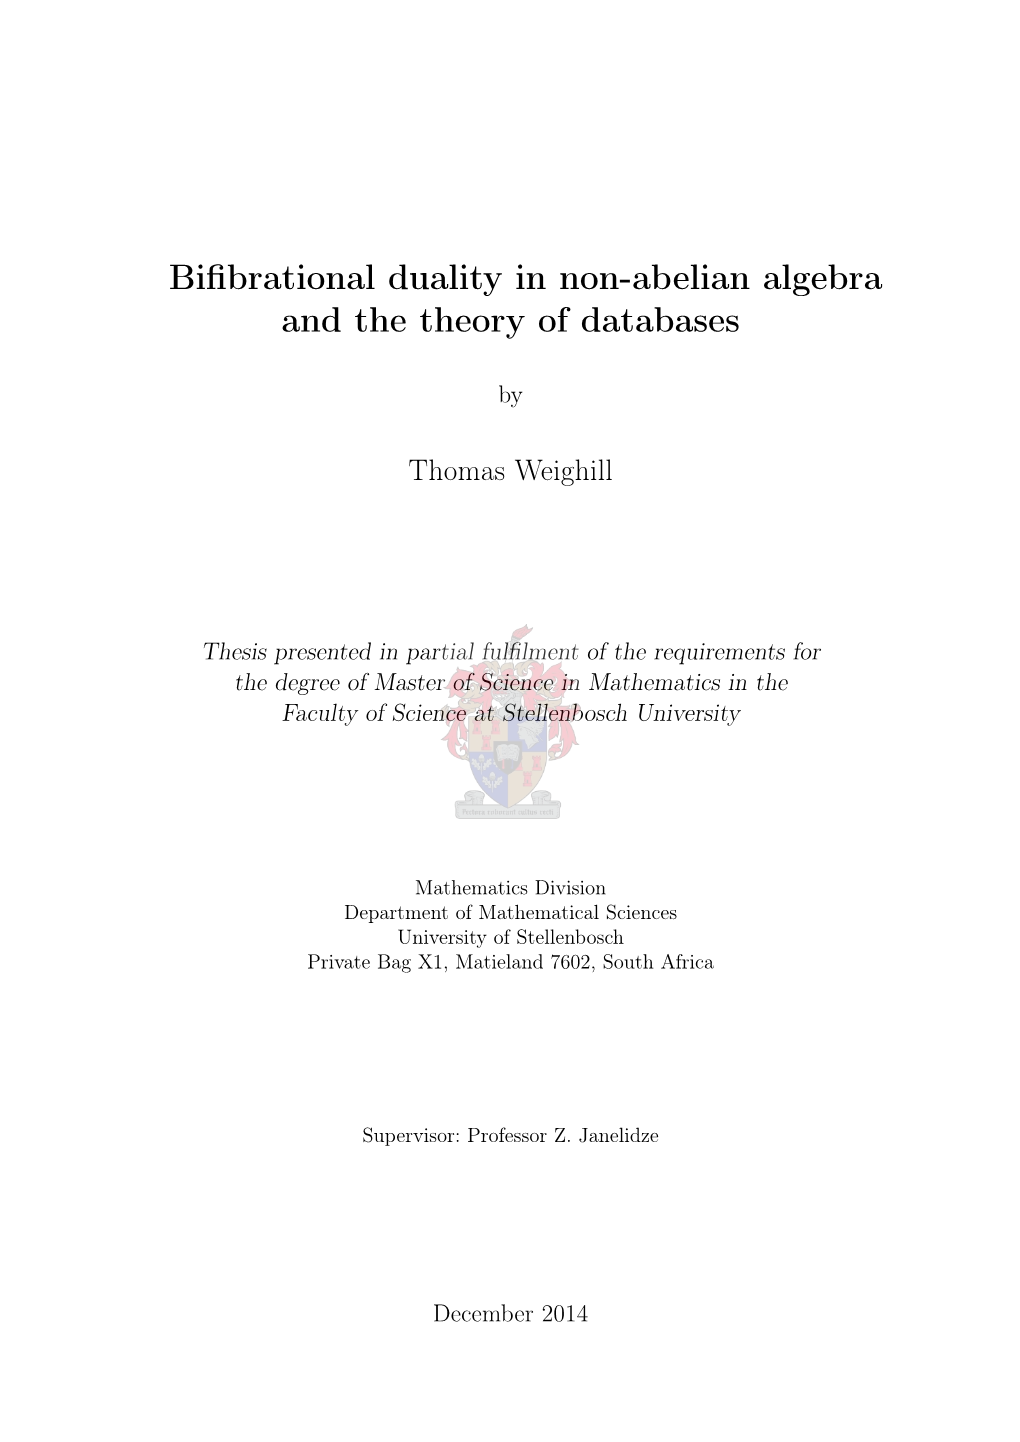 Bifibrational Duality in Non-Abelian Algebra and the Theory of Databases